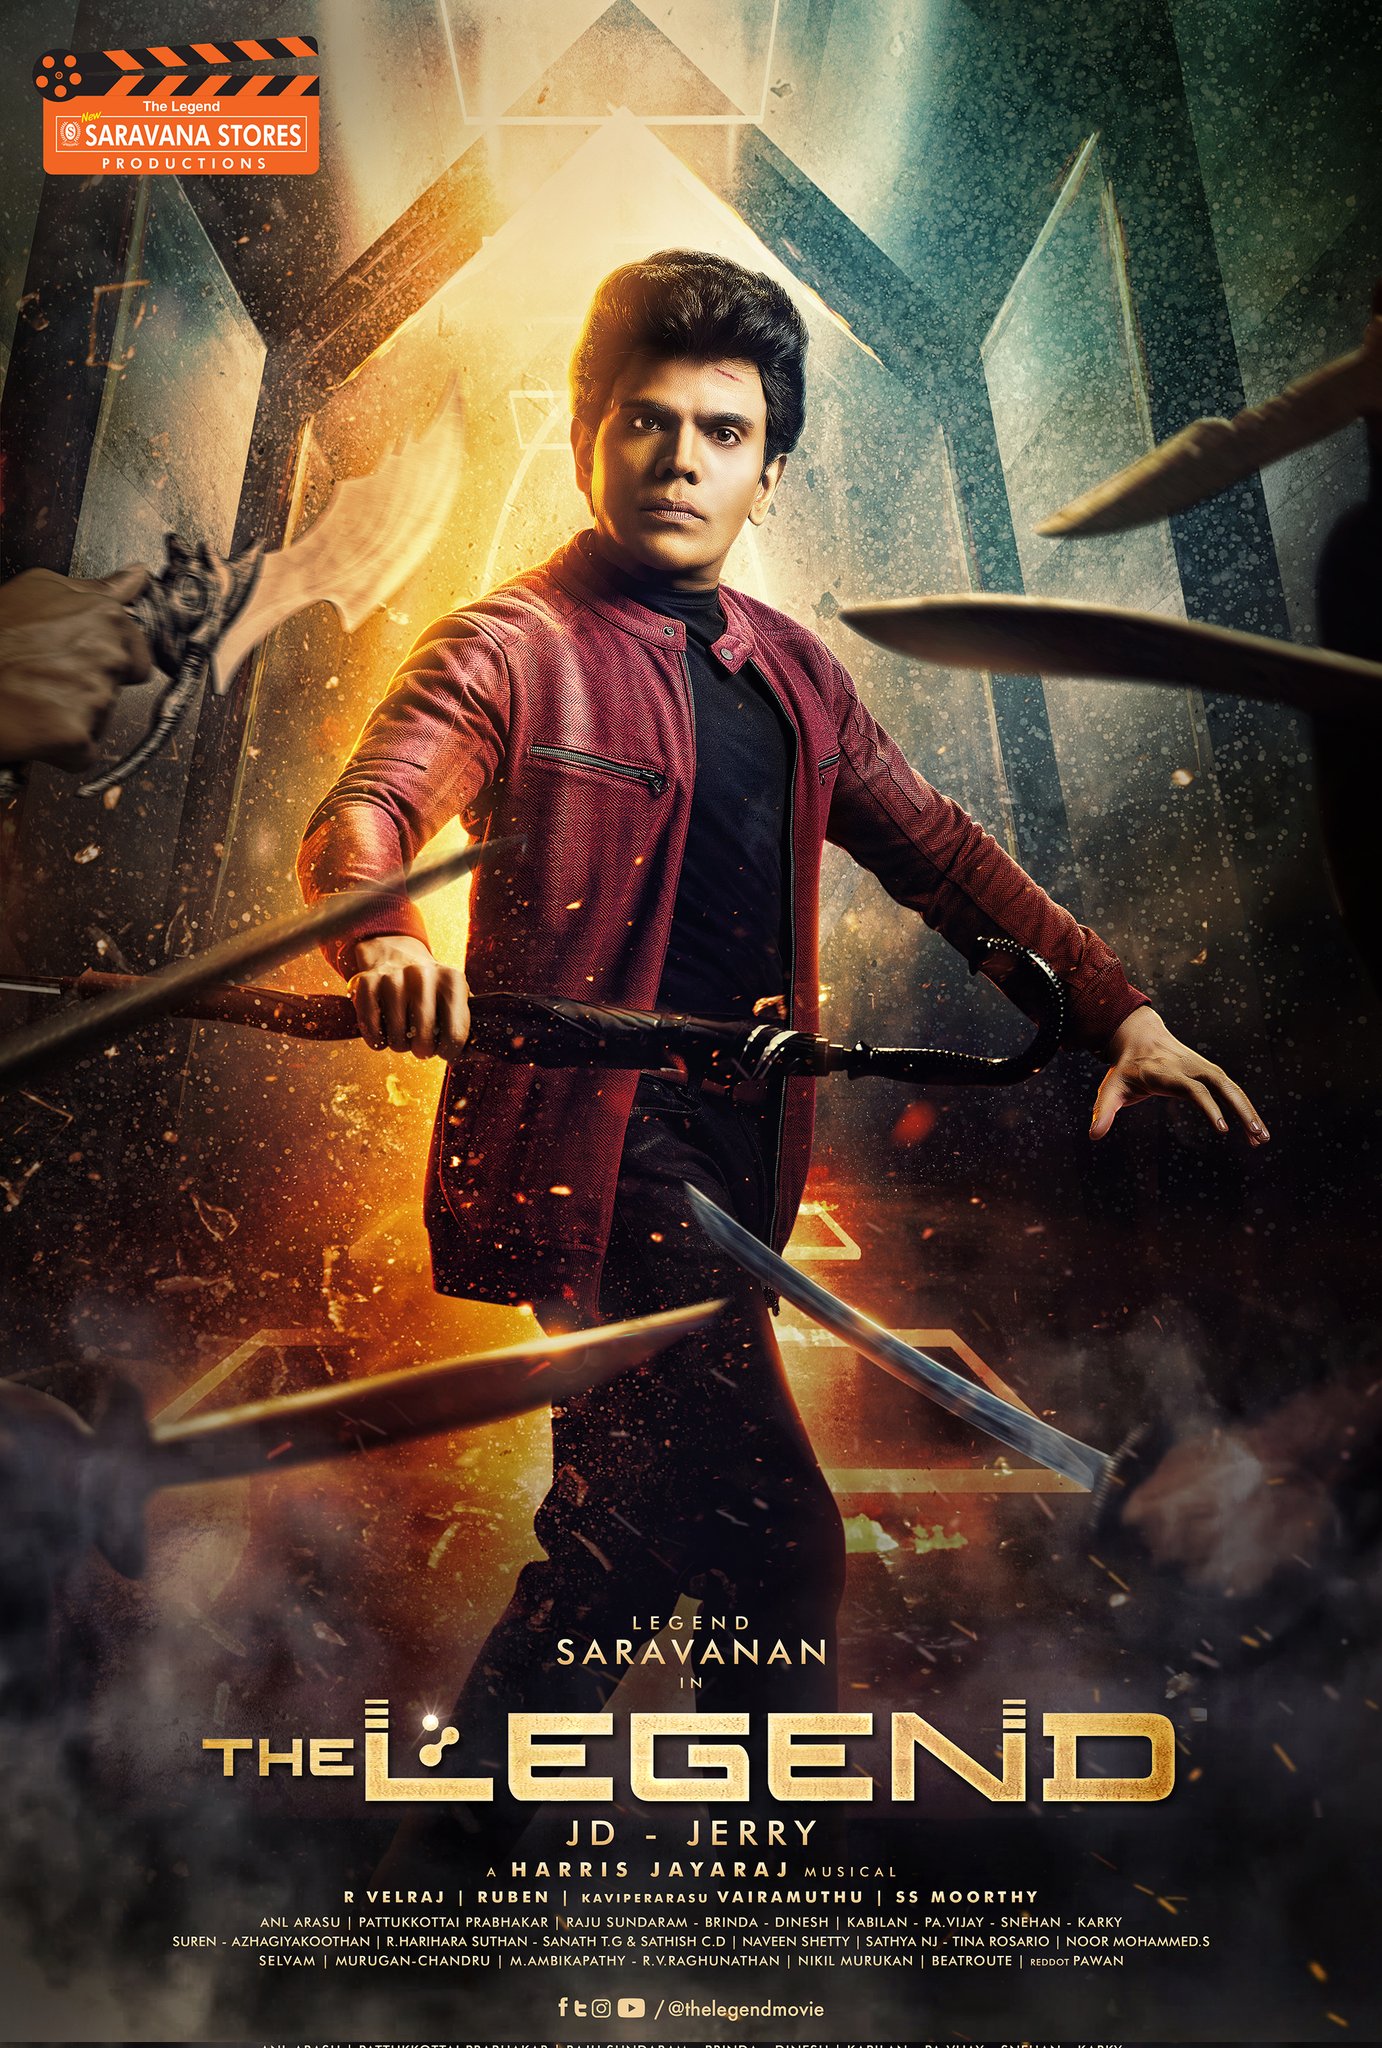 The Legend 2022 Hindi Dubbed 36330 Poster.jpg